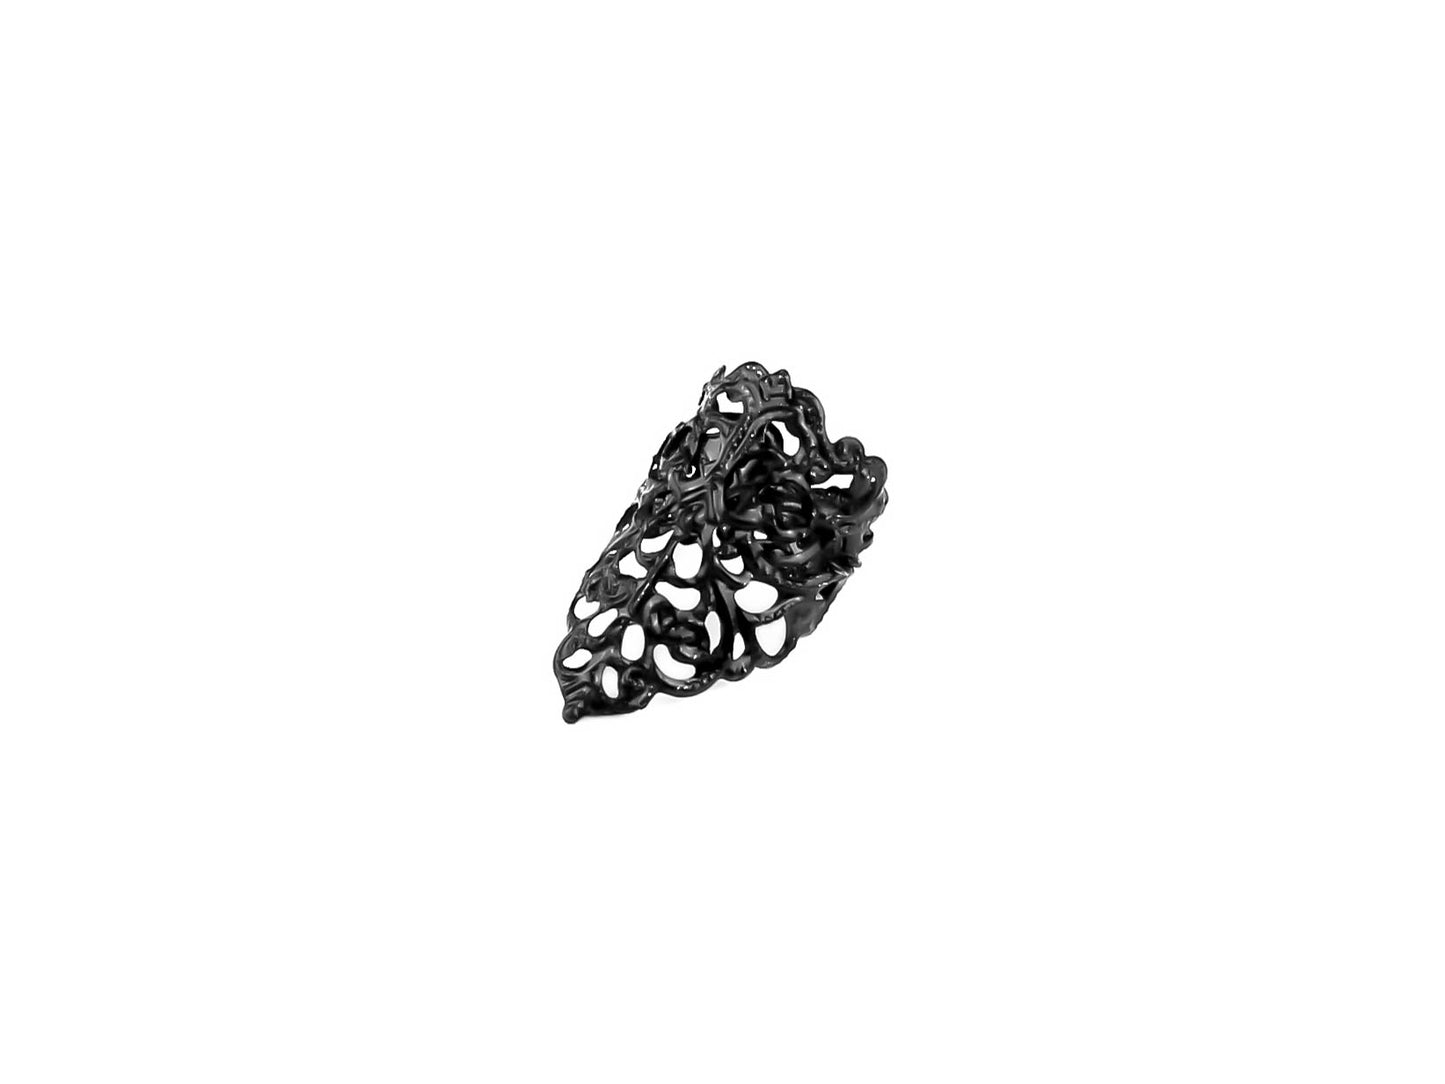 Presenting Myril Jewels' goth midi ring, a masterful expression of dark-avantgarde artistry. This neo-gothic jewel showcases an elaborate, blackened metalwork with an openwork pattern that mimics the intricate beauty of natural forms. Its bold yet intricate design captures the essence of gothic-chic, making it an ideal accessory for those drawn to the enigmatic world of whimsigoth and witchcore. Designed for everyday wear, this midi ring is also perfect for accenting Halloween costumes